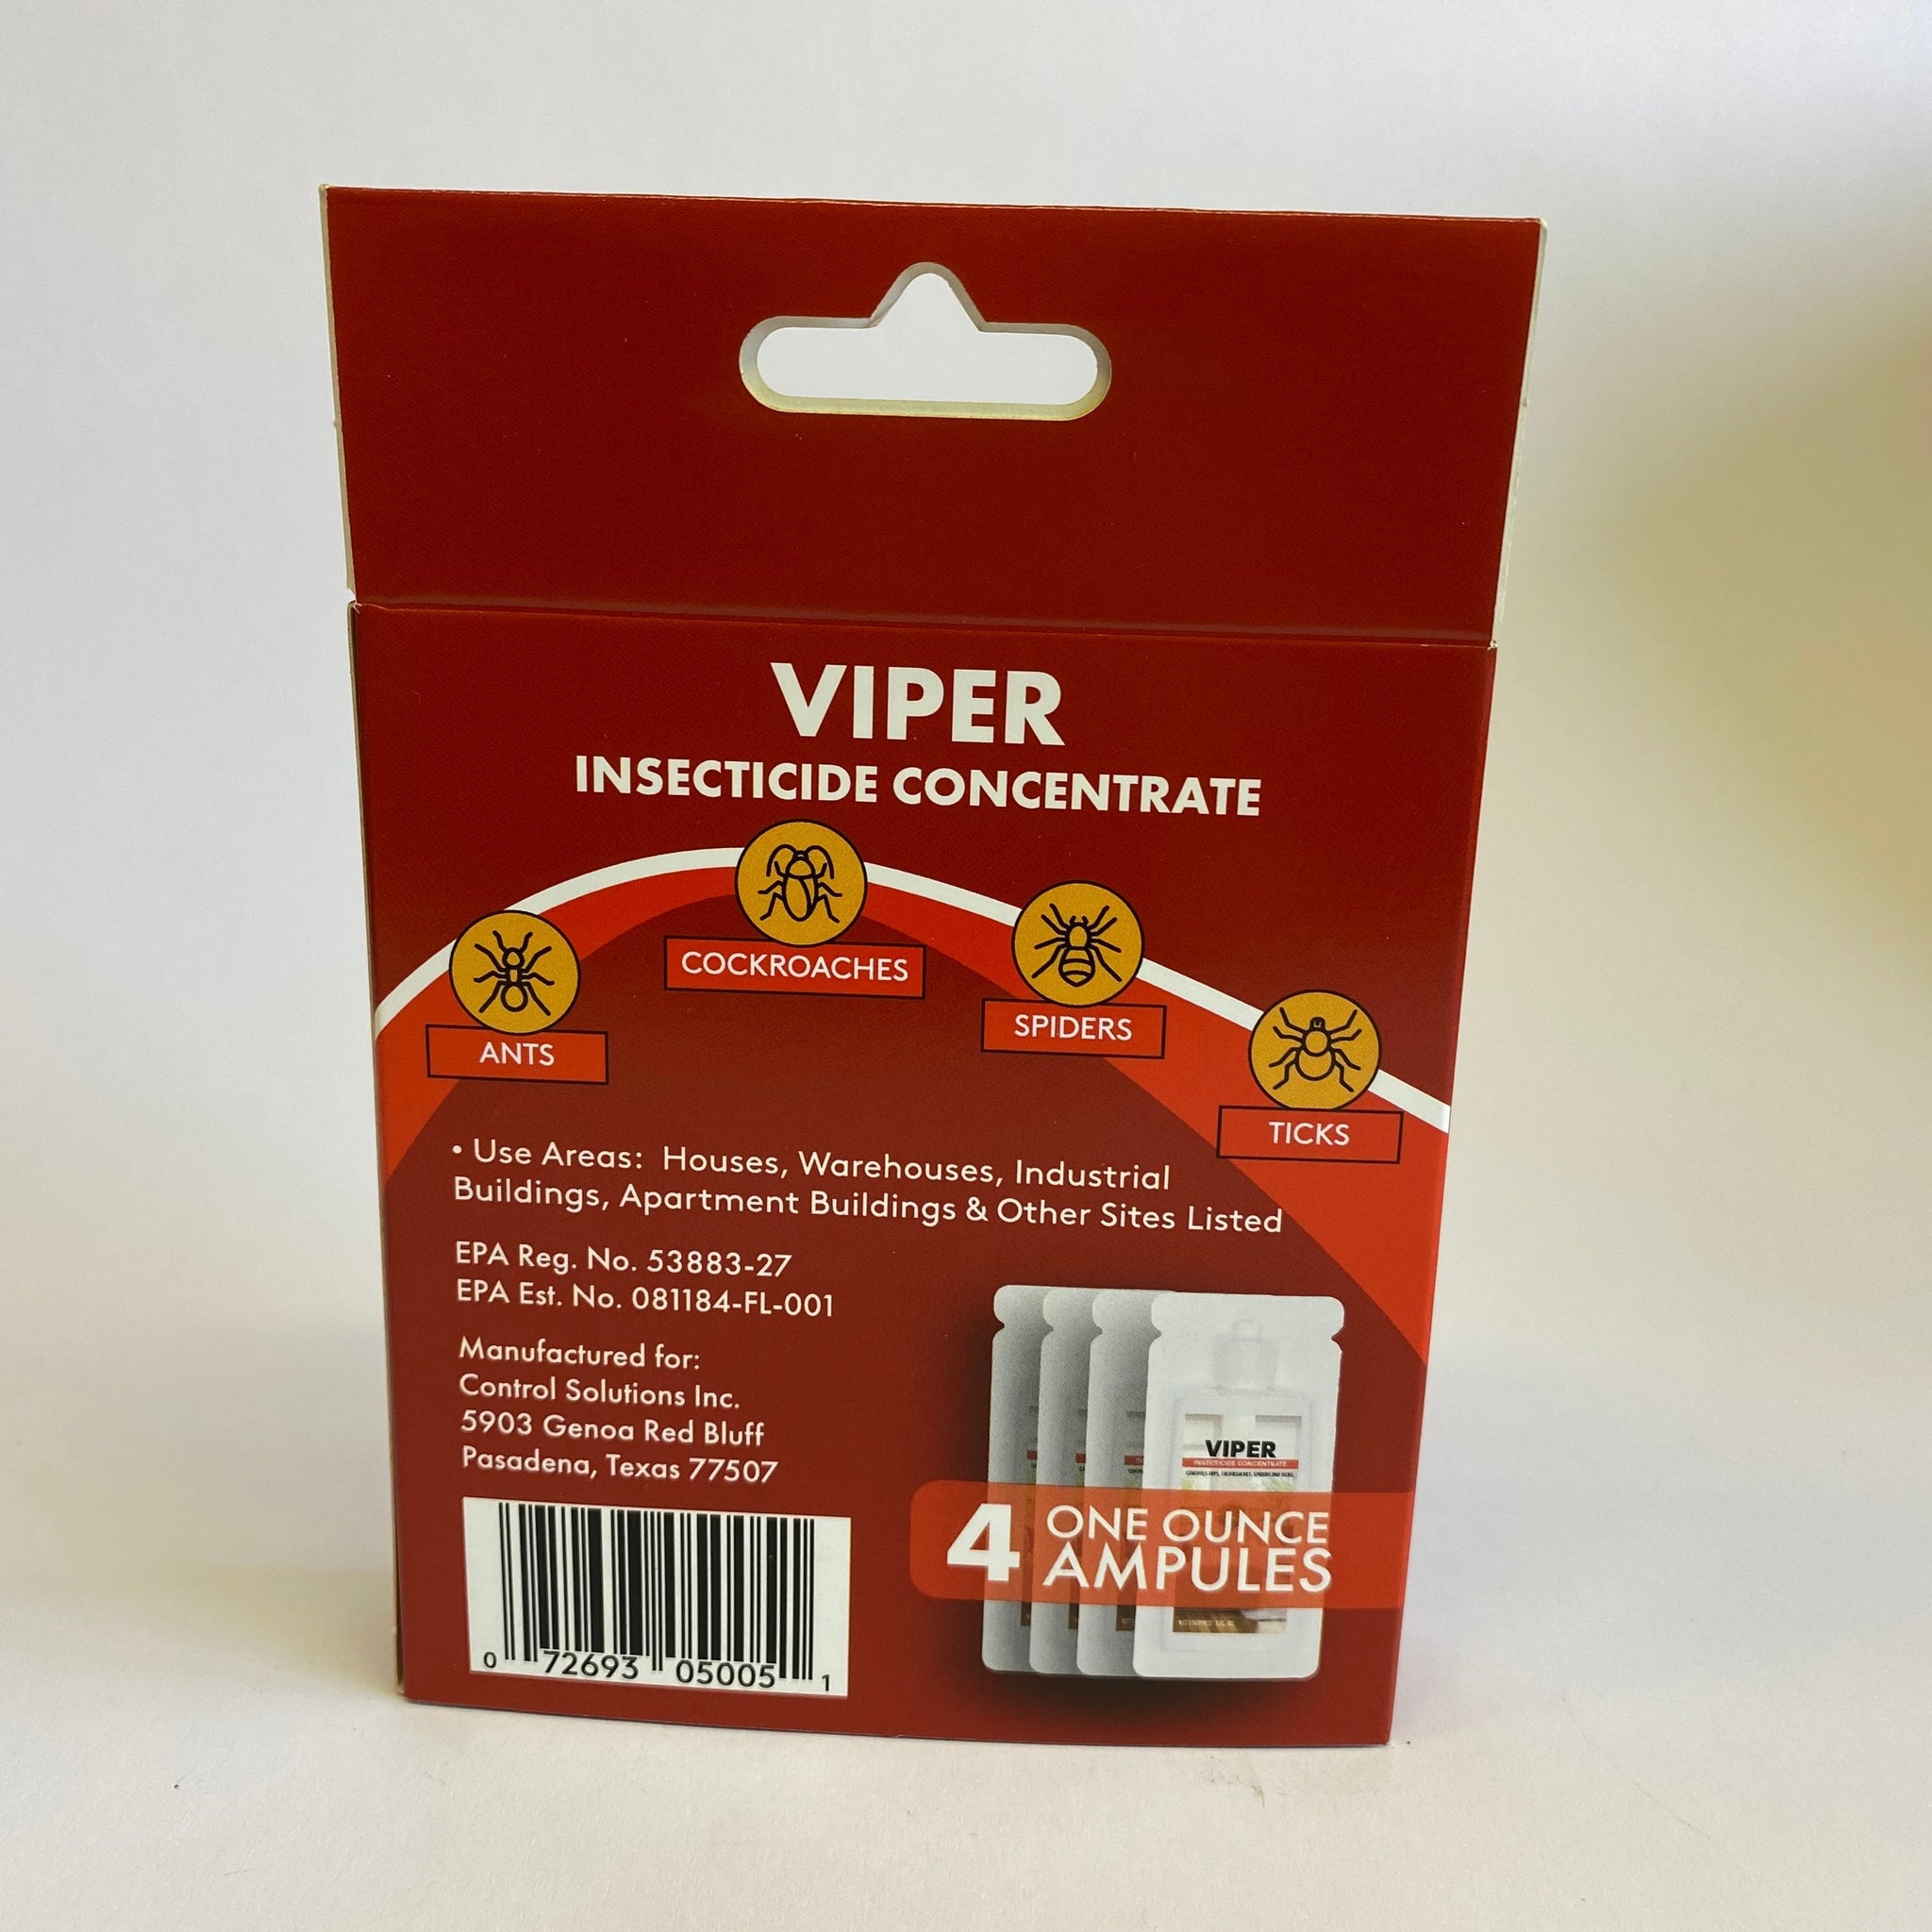 Viper Insecticide Concentrate - Four 1 ounce vials